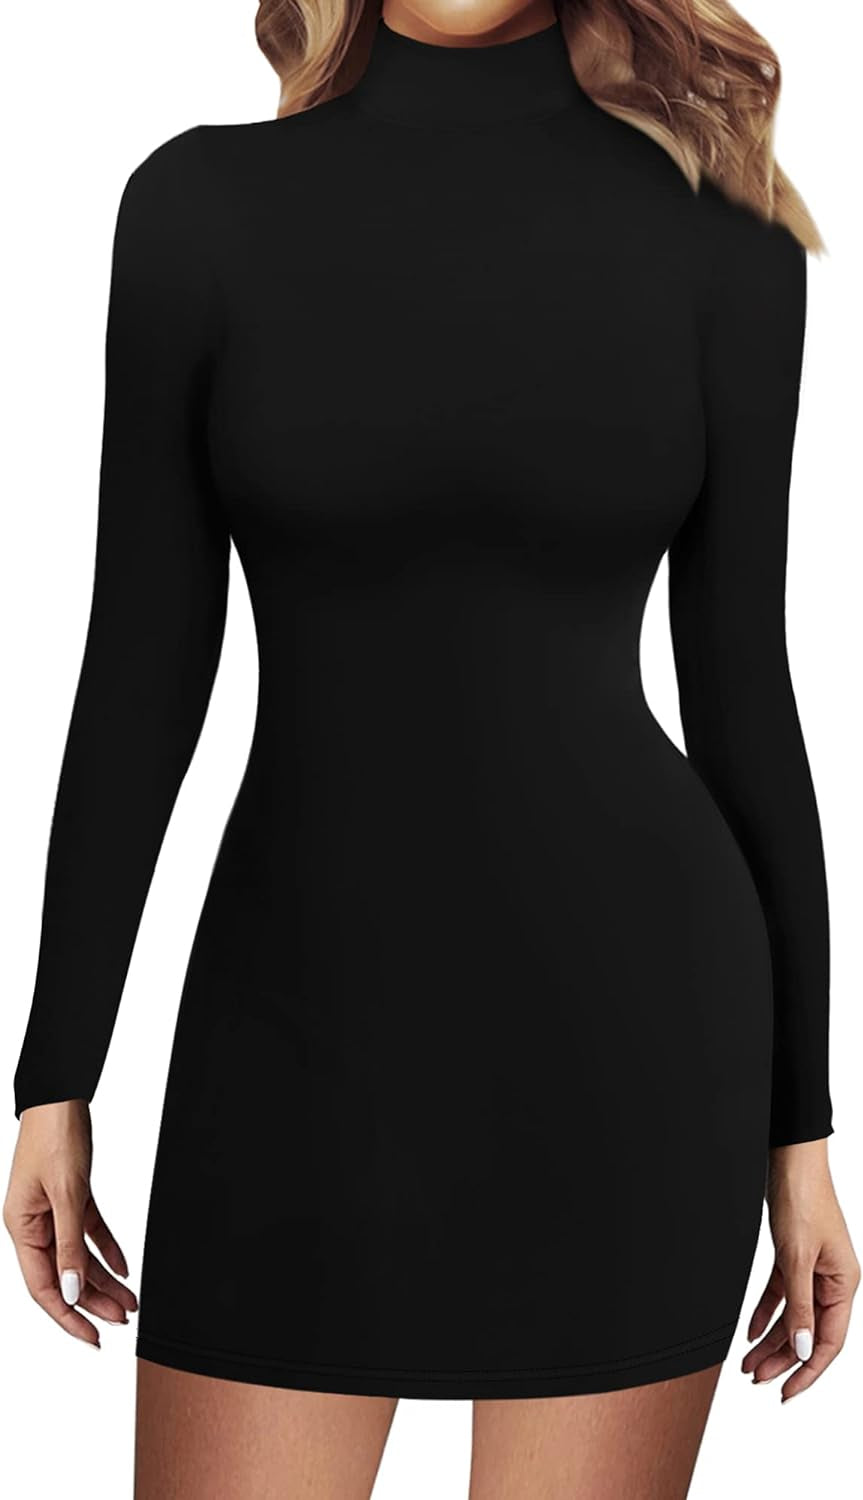 Women Sexy Fashion Long Sleeve Bodycon Dress Casual Sexy Stand Neck Fitted Stretch Mini Tight Short Dresses (Ordinary Black, Small)